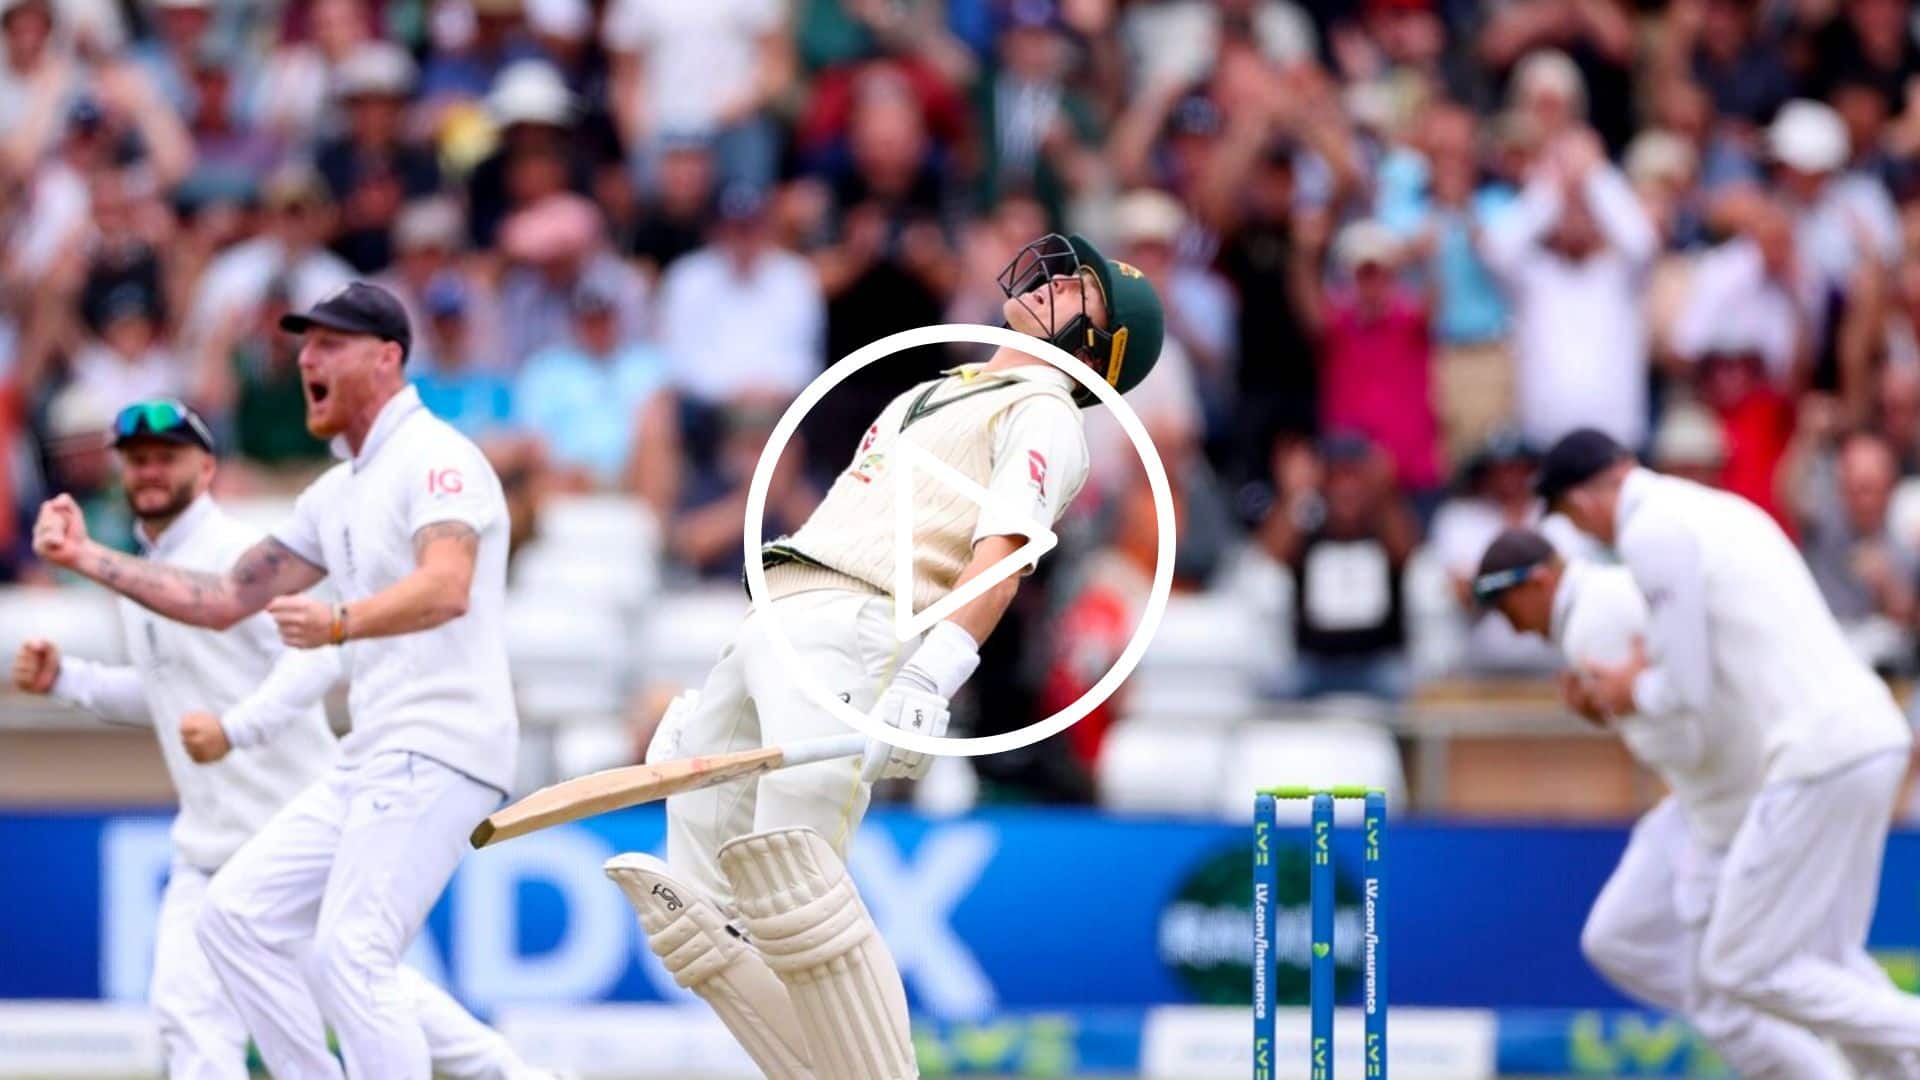 [WATCH] Woakes Knocks Over Labuschagne With An Unplayable Delivery